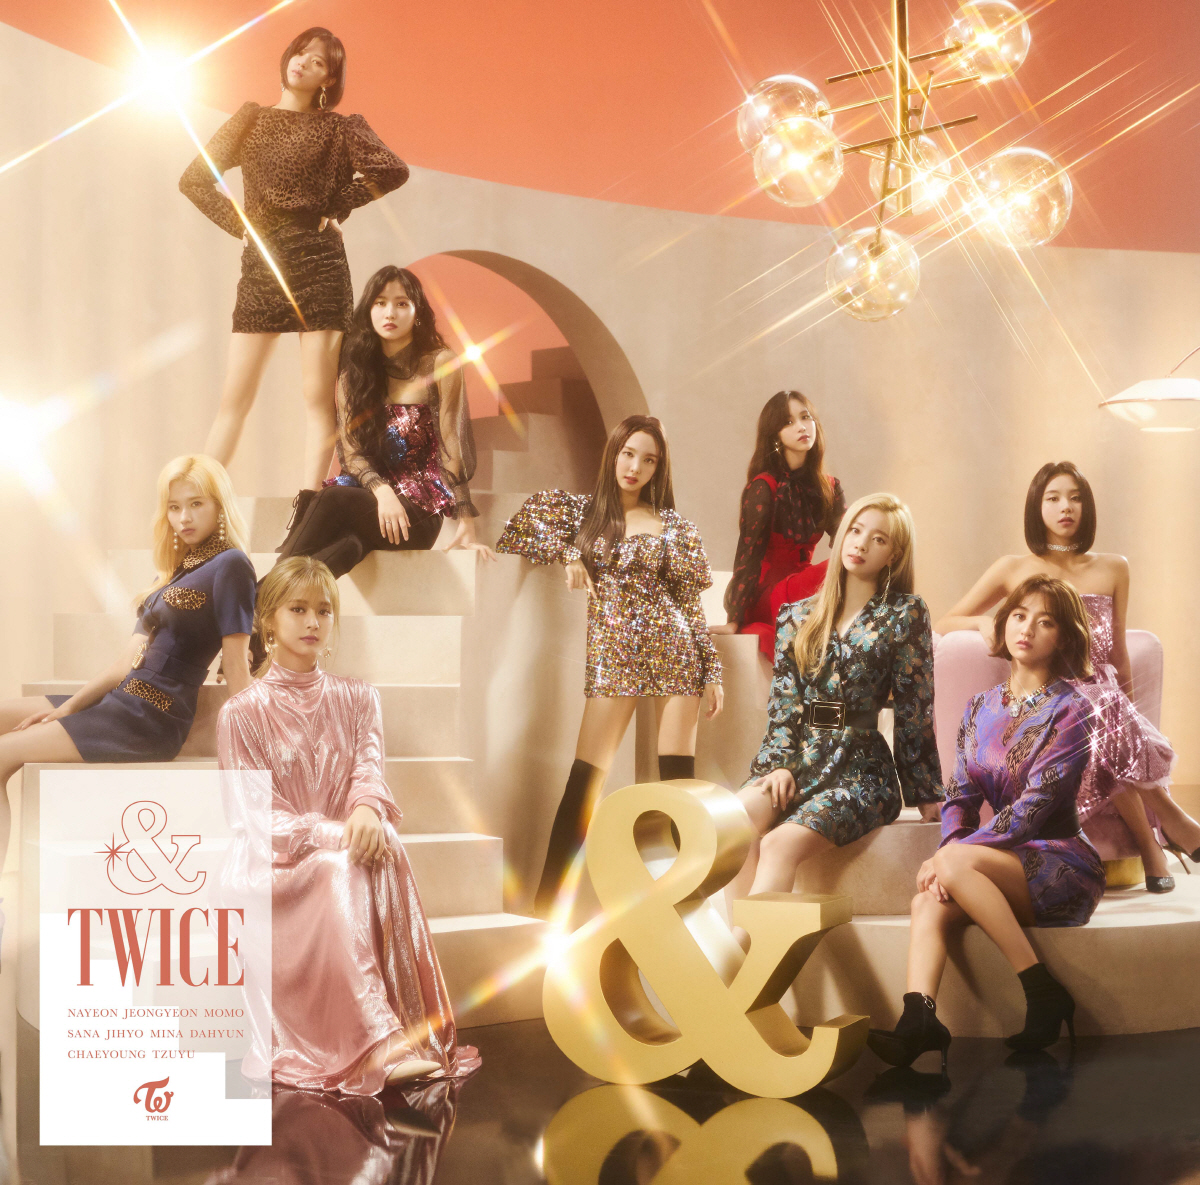 TWICE was hotly popular locally with Japans second album &TWICE (And TWICE).TWICEs new album  & TWICE released on the 20th recorded 85,563 points, ranking first in the Oricon de Ely album ranking on November 19 and showing off the status of the Asian one-top girl group.Prior to the release of the New album, the title song Fake & True (Fake & True) Music Video and soundtrack were released on the 18th of last month.Soundtrack has reached the top of the Japan Line Music Real-time Chart, and Music Video has also been popular with TWICEs colorful charm.The new album &TWICE contains the infinite possibilities of TWICE, and it also contains a message to fans around the world, Always with TWICE.New album includes the title song Fake & True and HAPPY HAPPY (Happy Happy) and Breakthrough (Breakthrough), which were released locally for two consecutive weeks in July, and Stronger (Stronger), Chaining!), 10 songs including What You Waiting For (What You Waiting For), Be OK (Be OK), POLISH (Polish), How u doin (How You Doing) and The Reason Why (The Reason Wy).TWICE has been a locally released album since it was released on Japan in 2017, achieving the milestone of 8 Consecutive Platinum (certification awarded by the Japan Record Association to albums with shipments exceeding 250,000).It is noteworthy whether the new album will achieve 9 consecutive platinum.In addition, Japans representative year-end special program NHK Hongbaek Gapjeon has been confirmed for three consecutive years.TWICE is the first time that K-pop groups have been on stage for three consecutive years in the program.TWICE is meeting with fans around the world with TWICE WORLD TOUR 2019 (TWICE World Tour 2019 TWICE Lights).Recently, on March 3-4, 2020, two performances of the Tokyo Dome were added to the fans enthusiastic cheers.